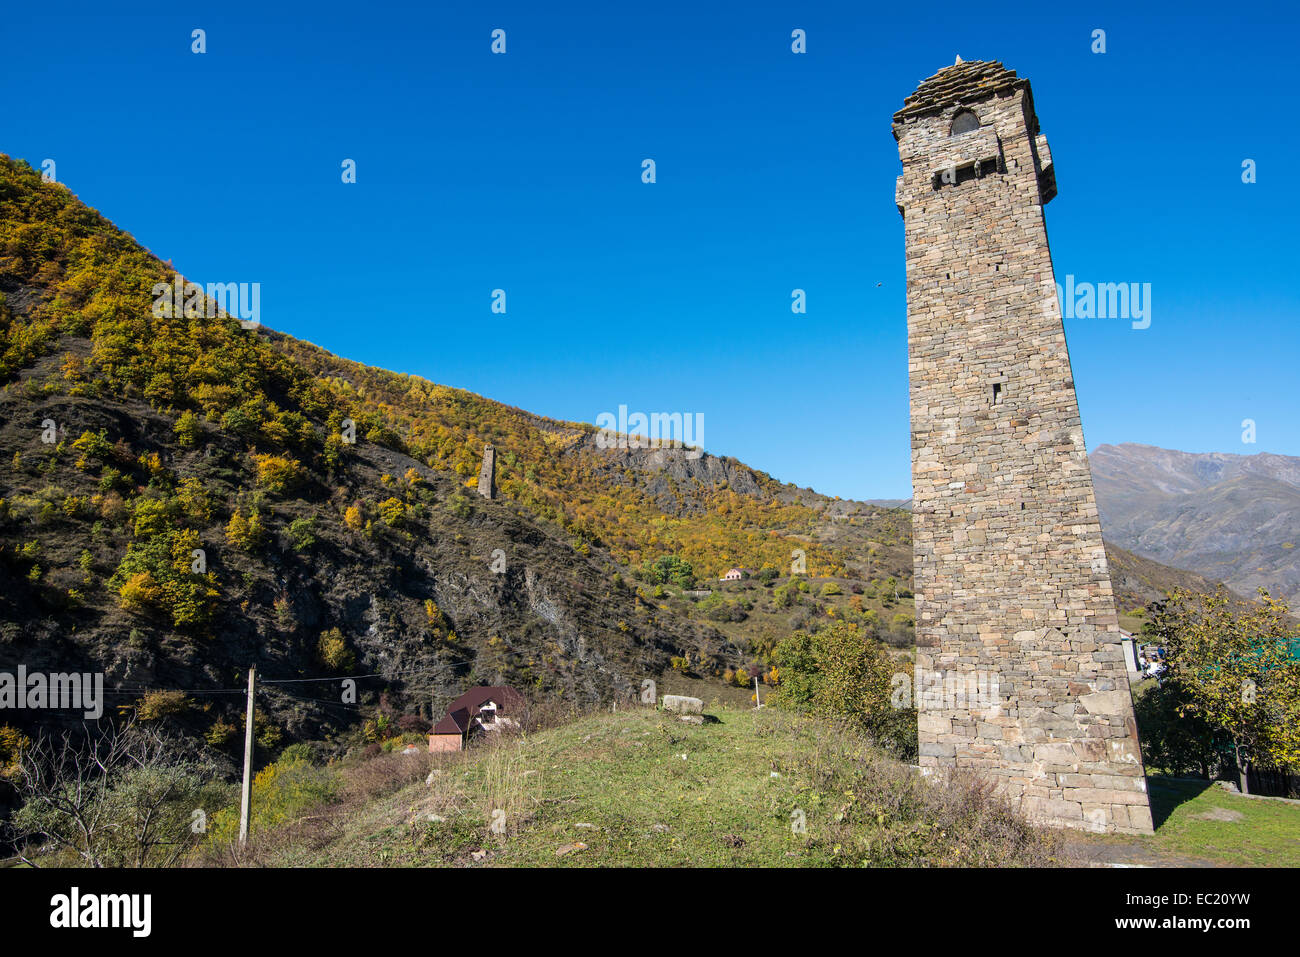 Chechen watchtower in the chechen mountains, near Itum Kale, Chechnya, Caucasus, Russia Stock Photo